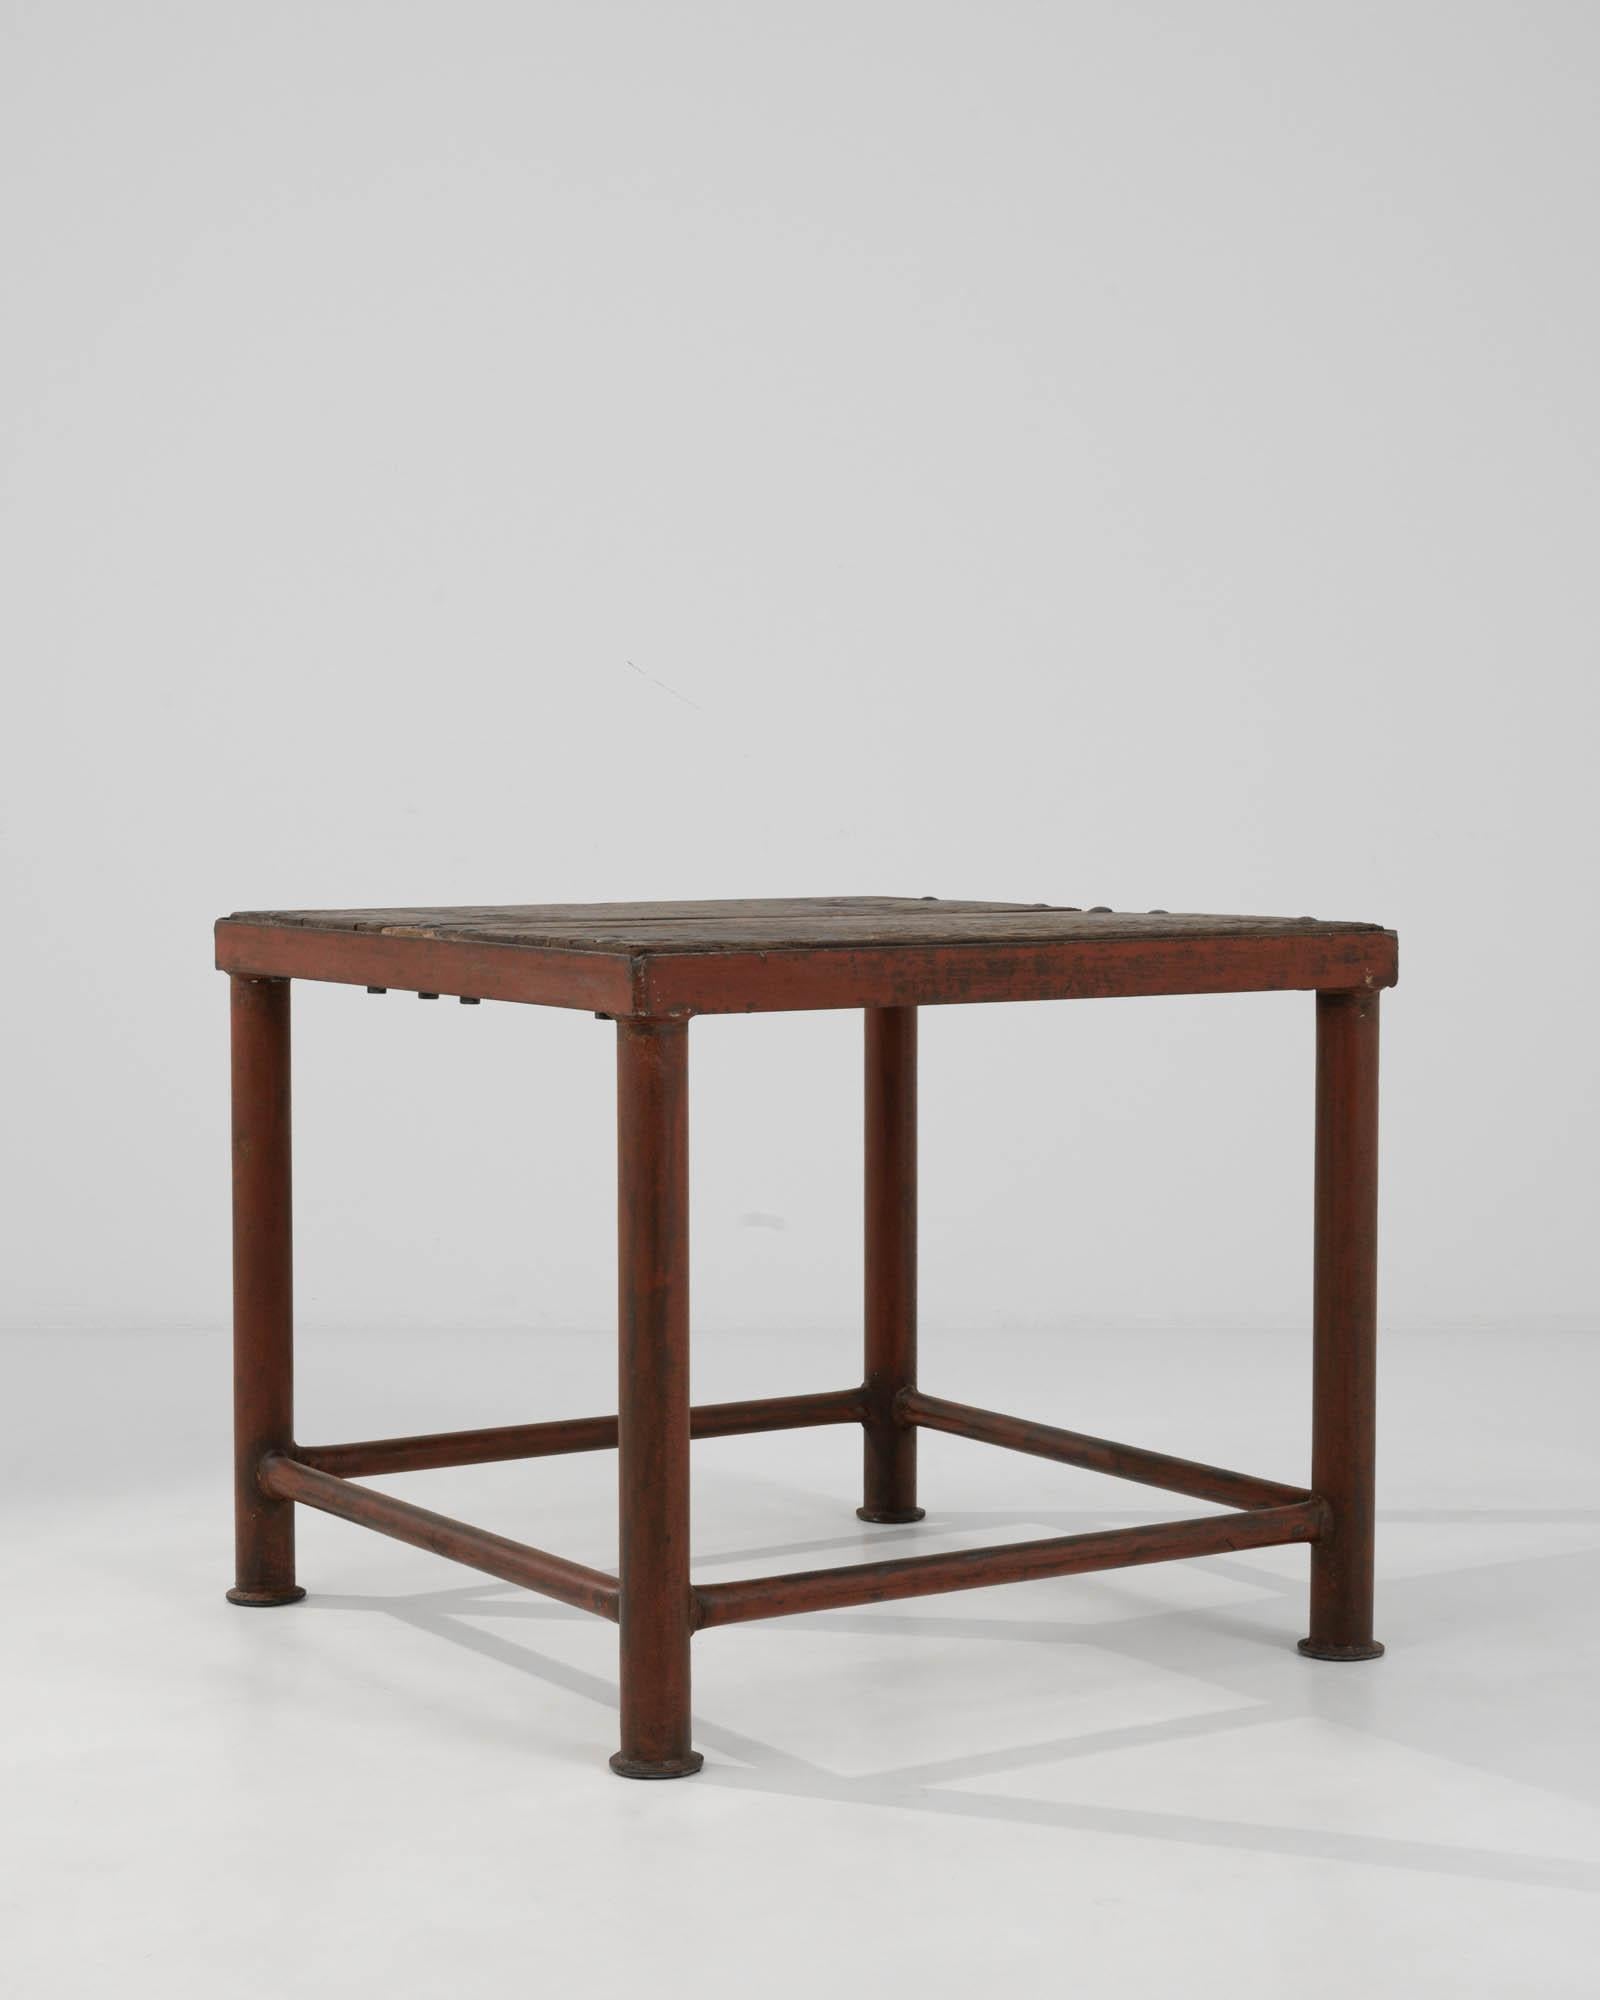 Metal 20th Century French Industrial Table With Wooden Top For Sale